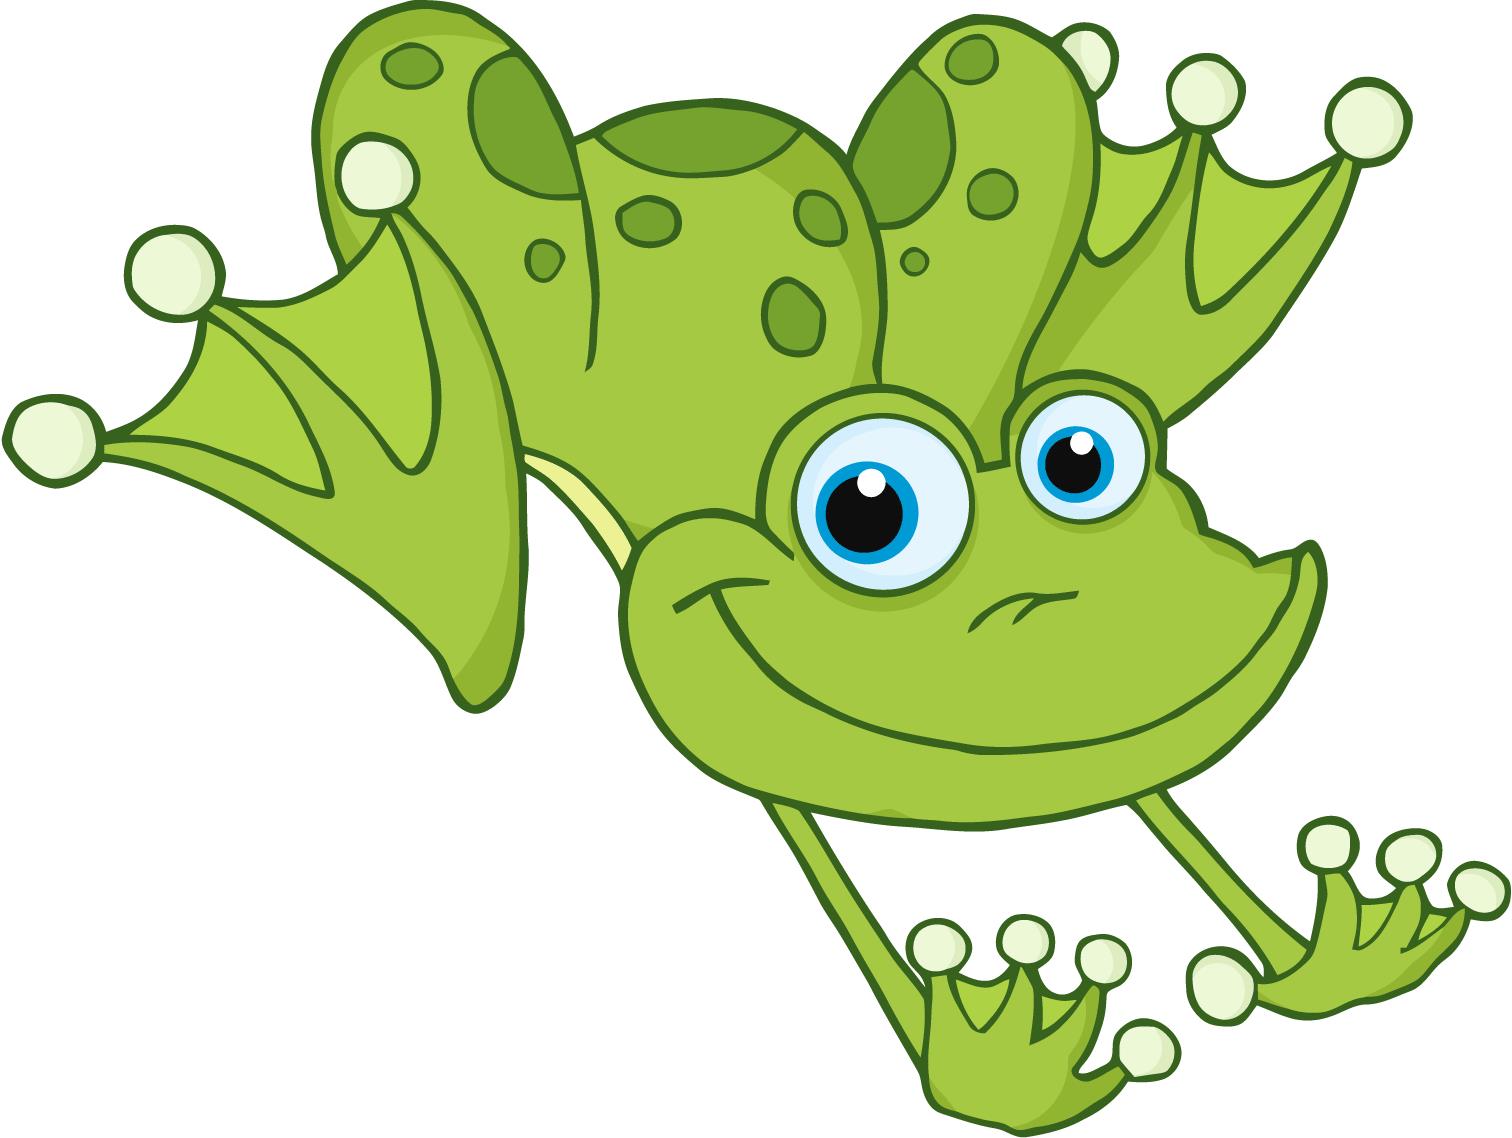 Hopping Frog PNG - 69474